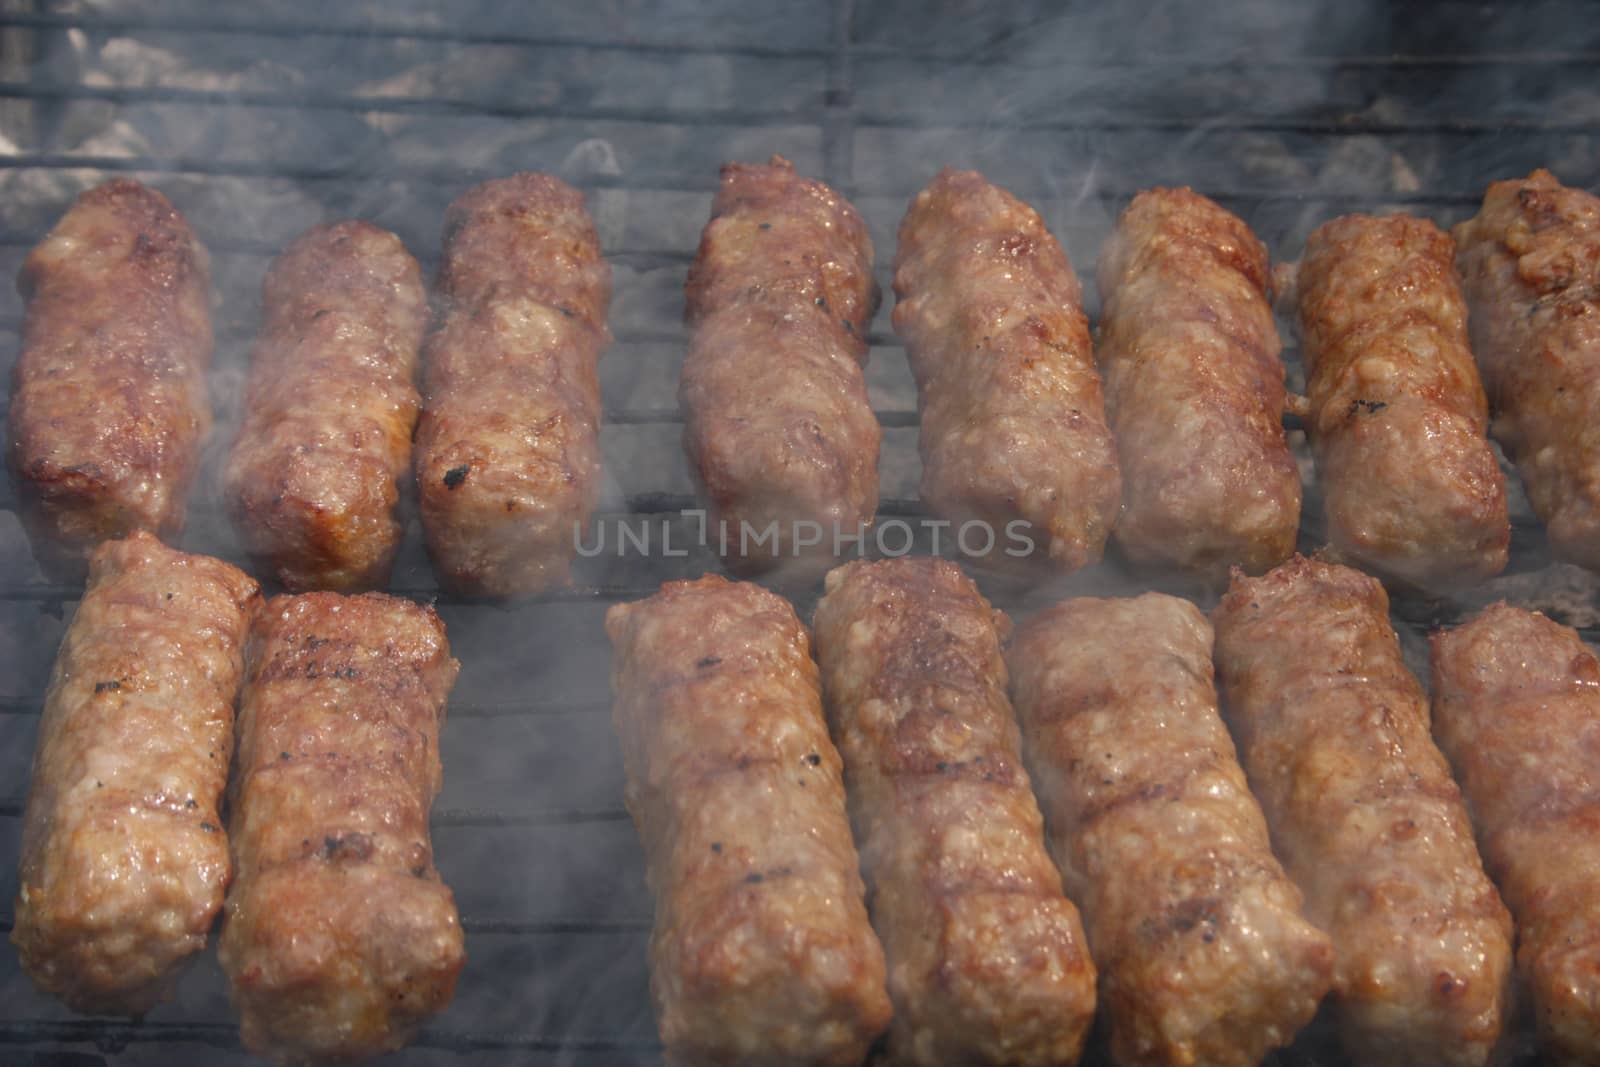 Barbecuing minced meat, traditional Romanian preparation for barbecue, called "mici",  on charcoal fire - closeup image.
